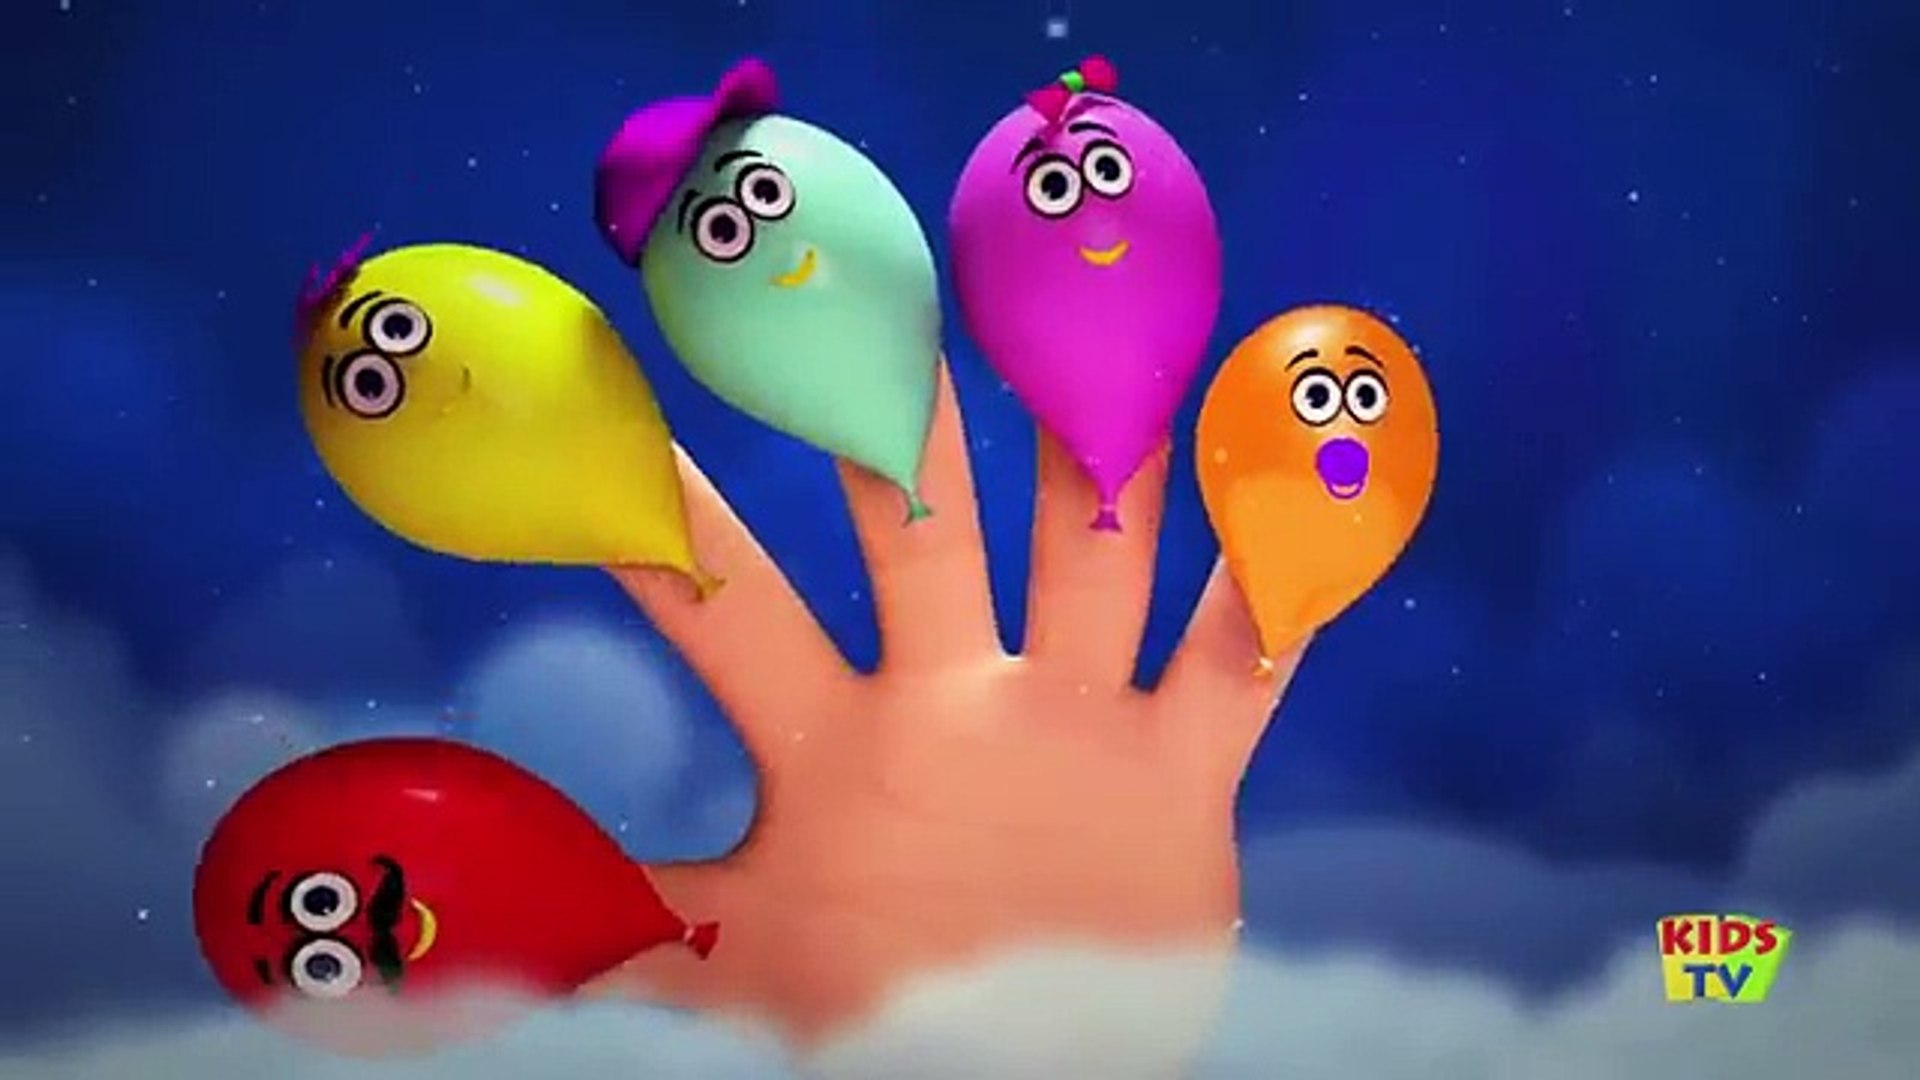 Finger Family Fruits - Nursery Rhymes For Kids And Childrrens - Fruits Song  For Babies - Hindi Urdu Famous Nursery Rhymes for kids-Ten best Nursery  Rhymes-English Phonic Songs-ABC Songs For children-Animated Alphabet